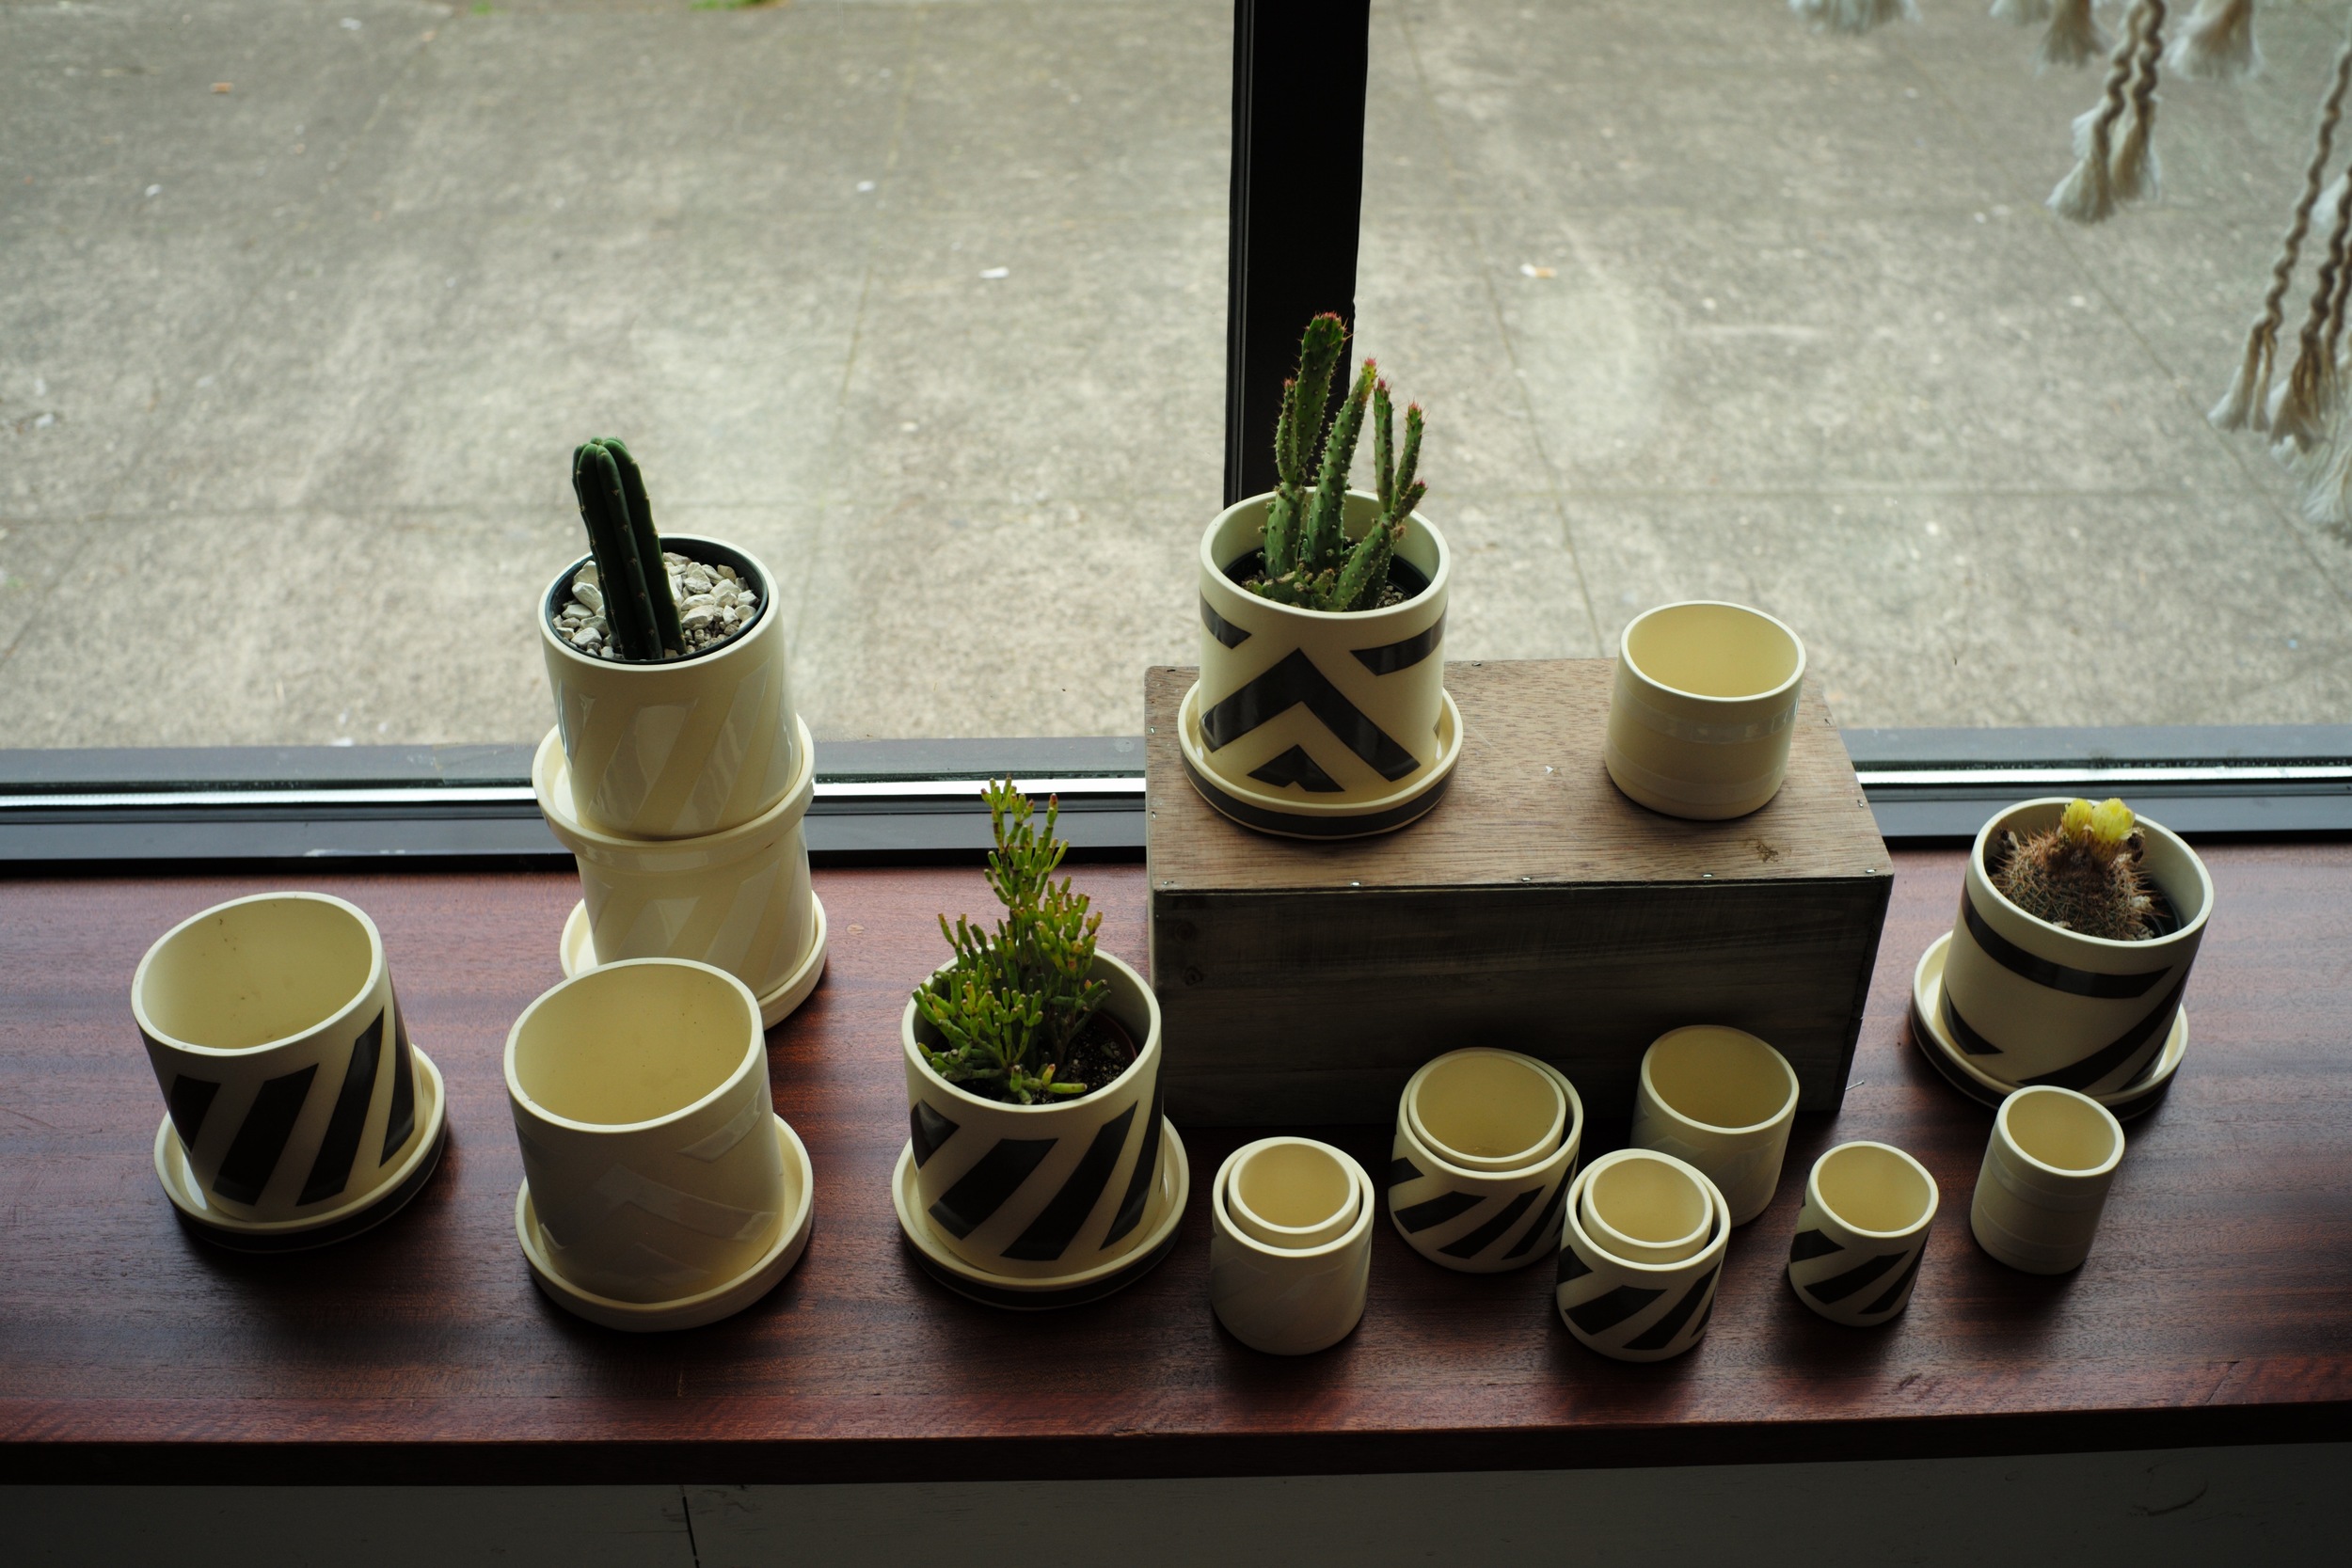 Cups and Cacti, Portland, OR 2016